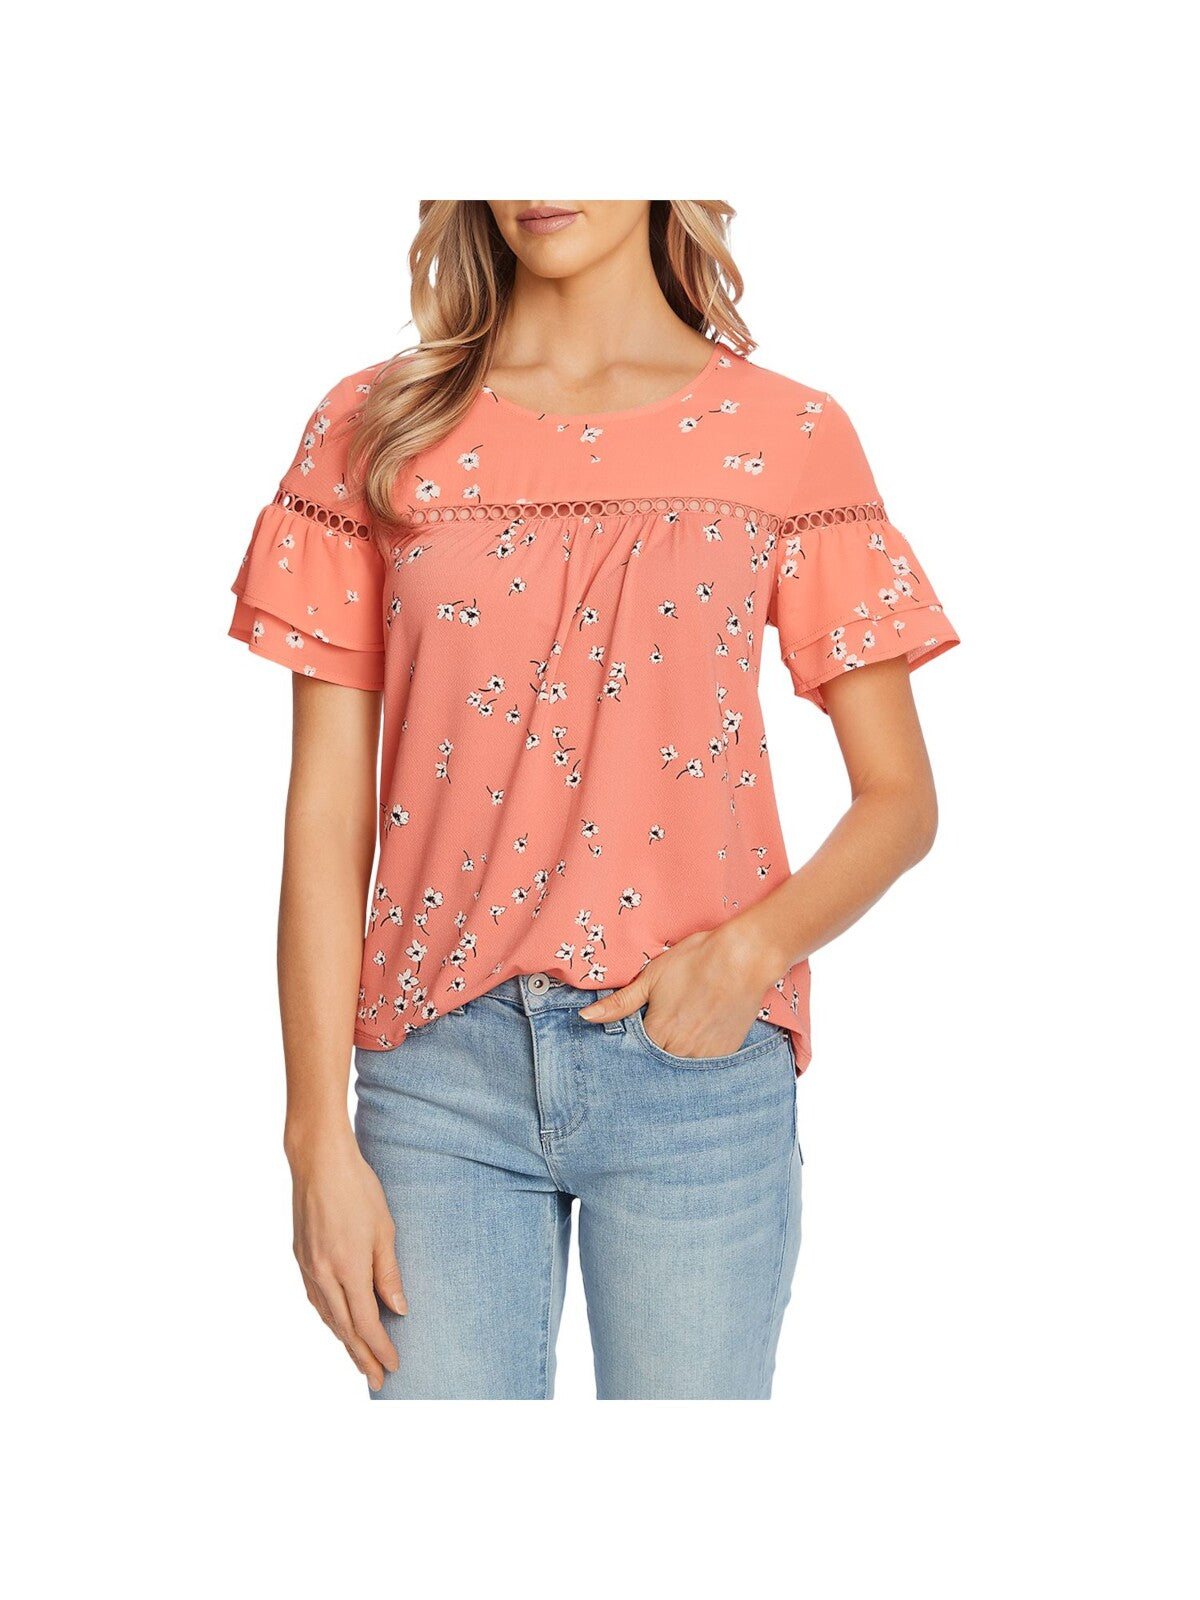 CECE Womens Orange Stretch Cut Out Short Tiered Sleeves Floral Round Neck Top S